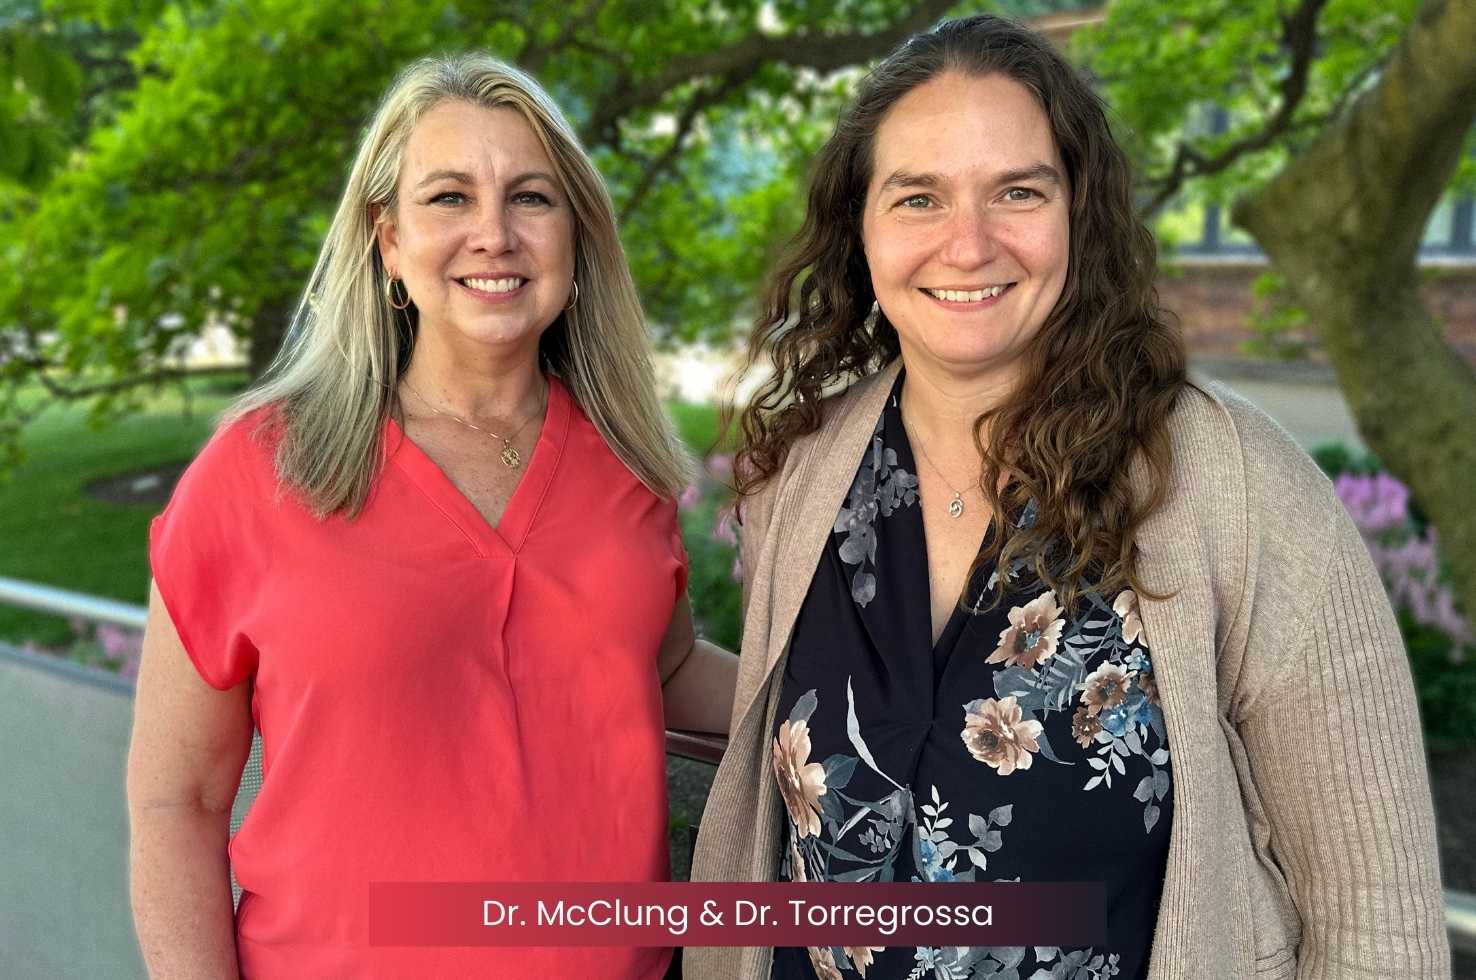 Drs. Colleen McClung and Mary Torregrossa